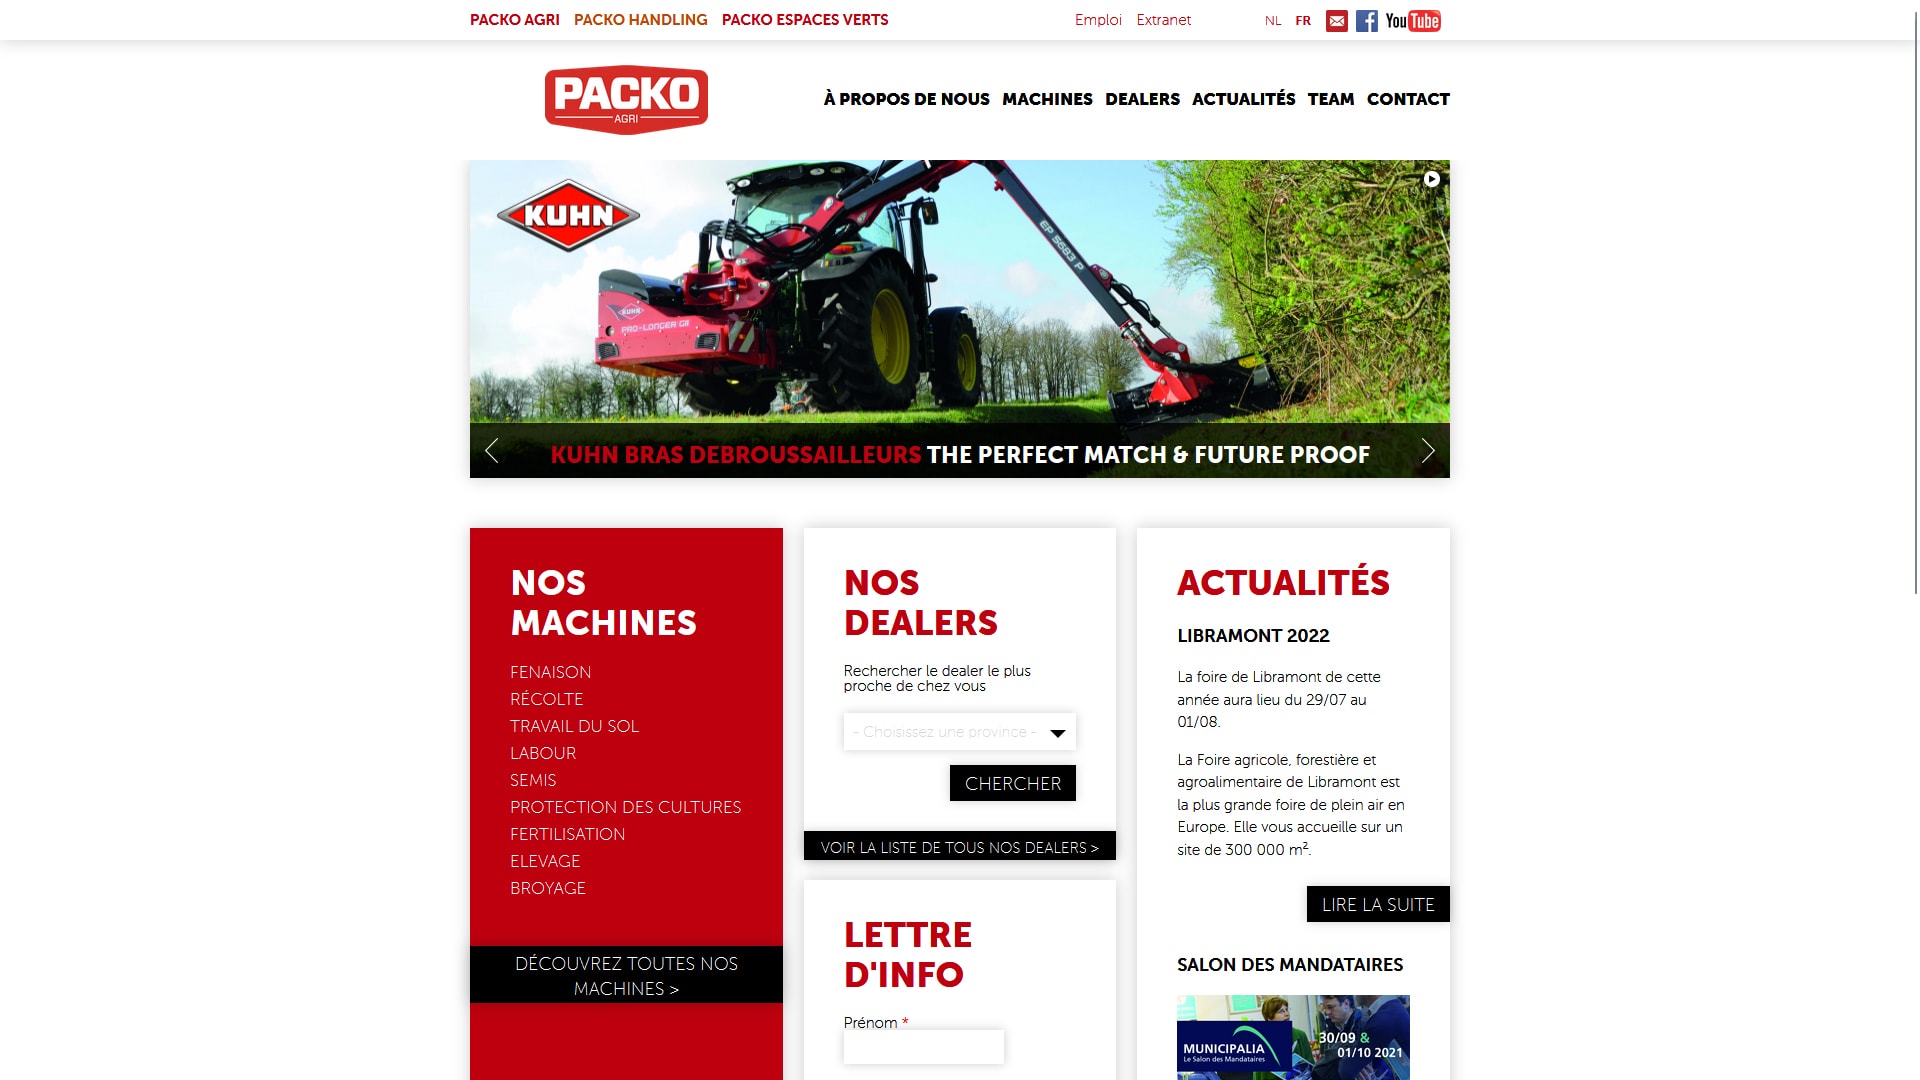 Packo Agri and Packo Handling Consultancy